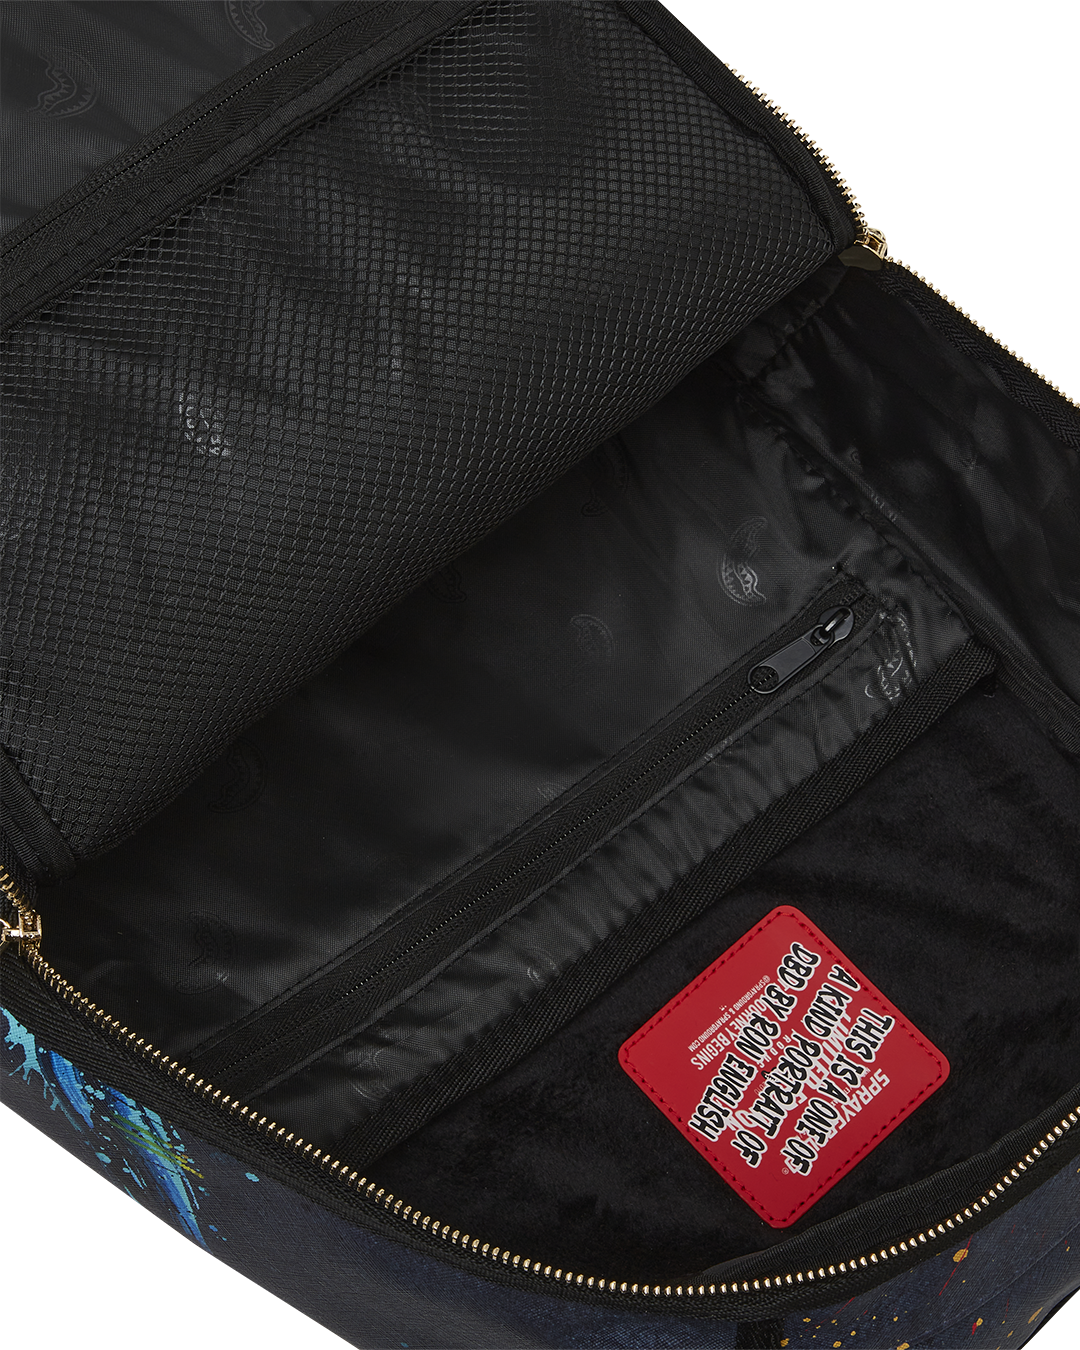 SPRAYGROUND® BACKPACK THE RARE DBD GRIN SHARK PORTRAIT BY RON ENGLISH- SUPER LIMITED EDITION